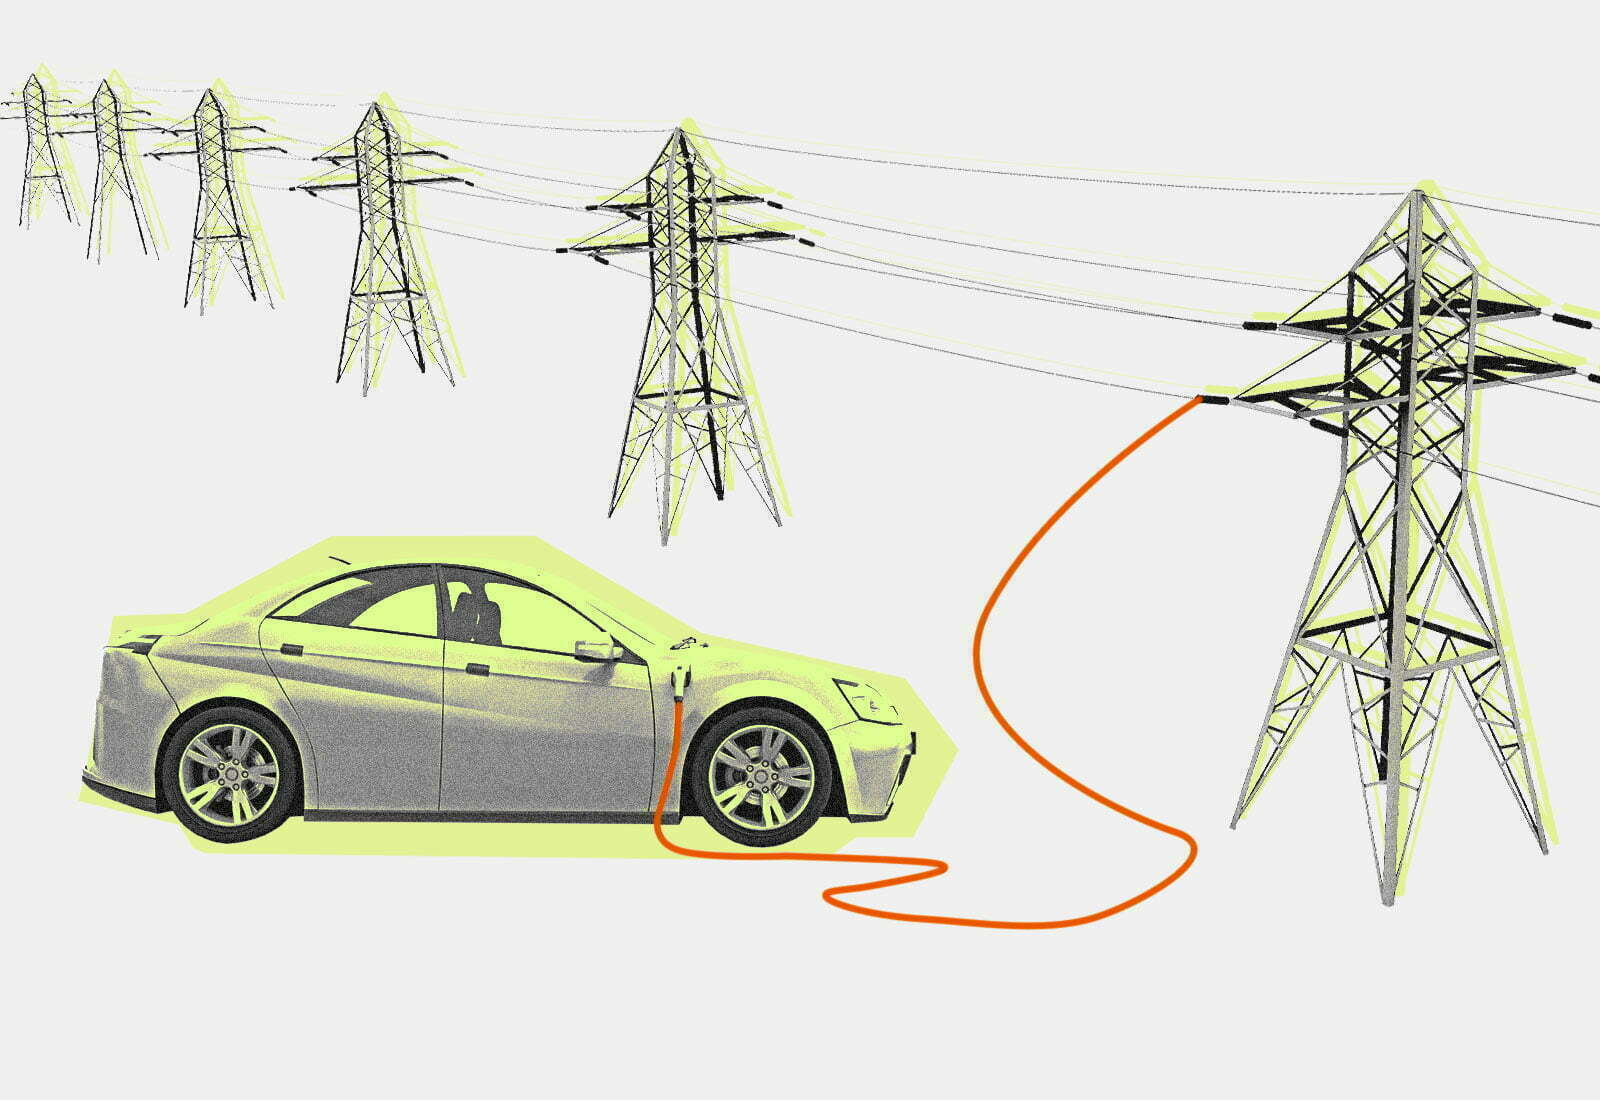 Your electric vehicle could become a mini power plant